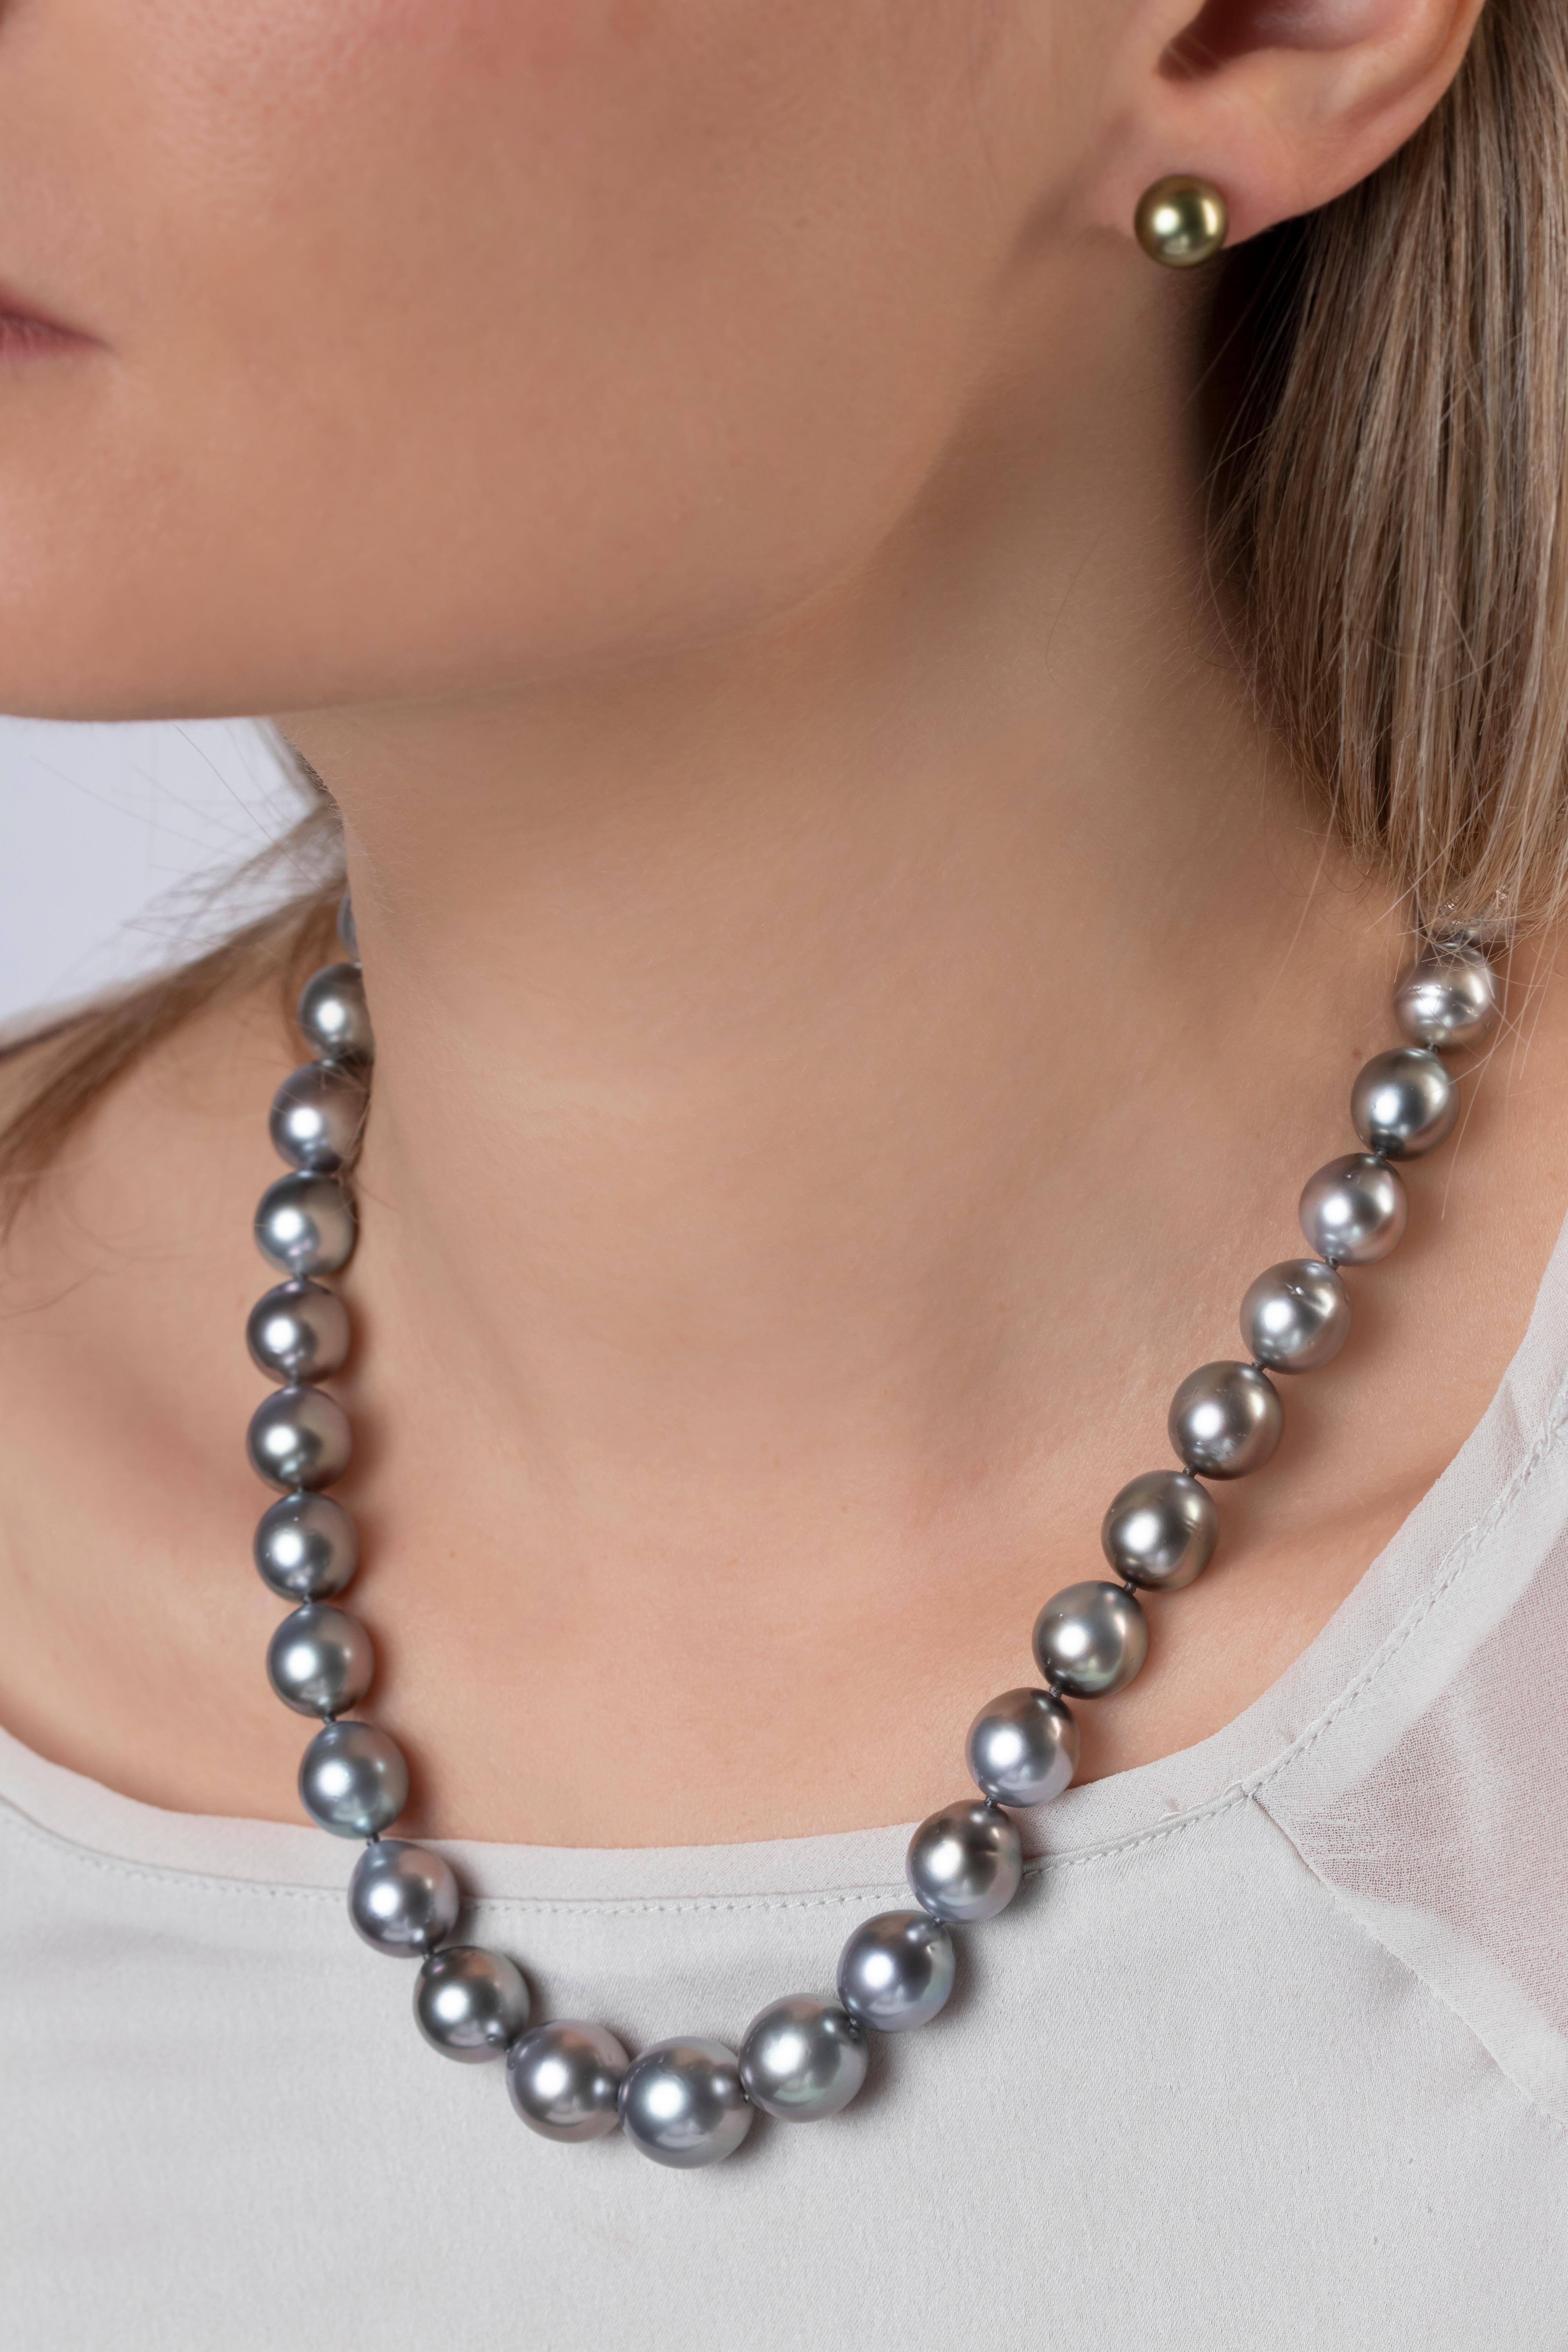 This elegant necklace by Yoko London features a row of alluring grey Tahitian pearls secured to a matt finished 18K white gold clasp. A classic style for a timeless look, this necklace is easily styled with both casual and formal attire.  Each pearl